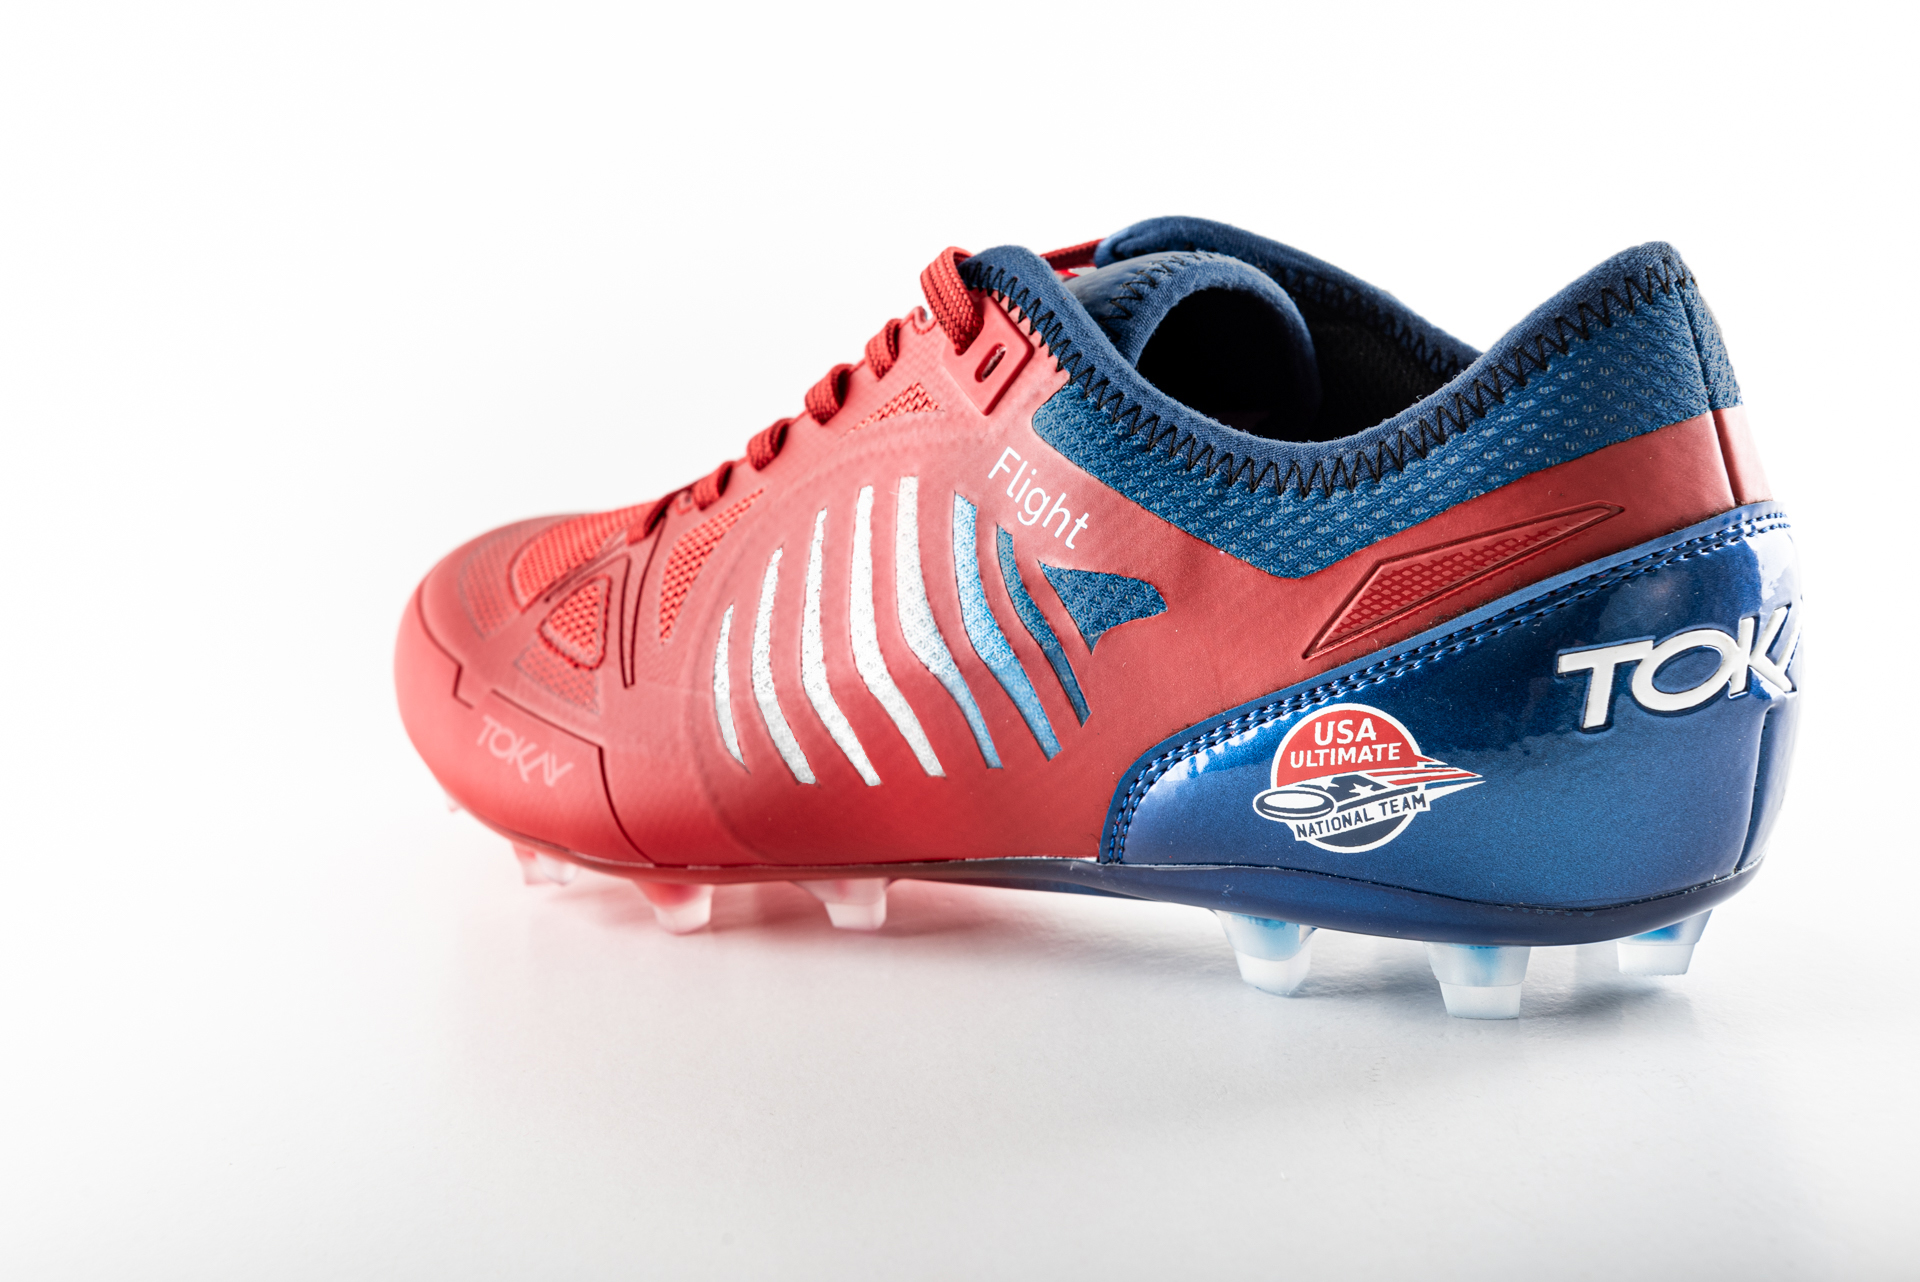 USA Ultimate team Official Cleats